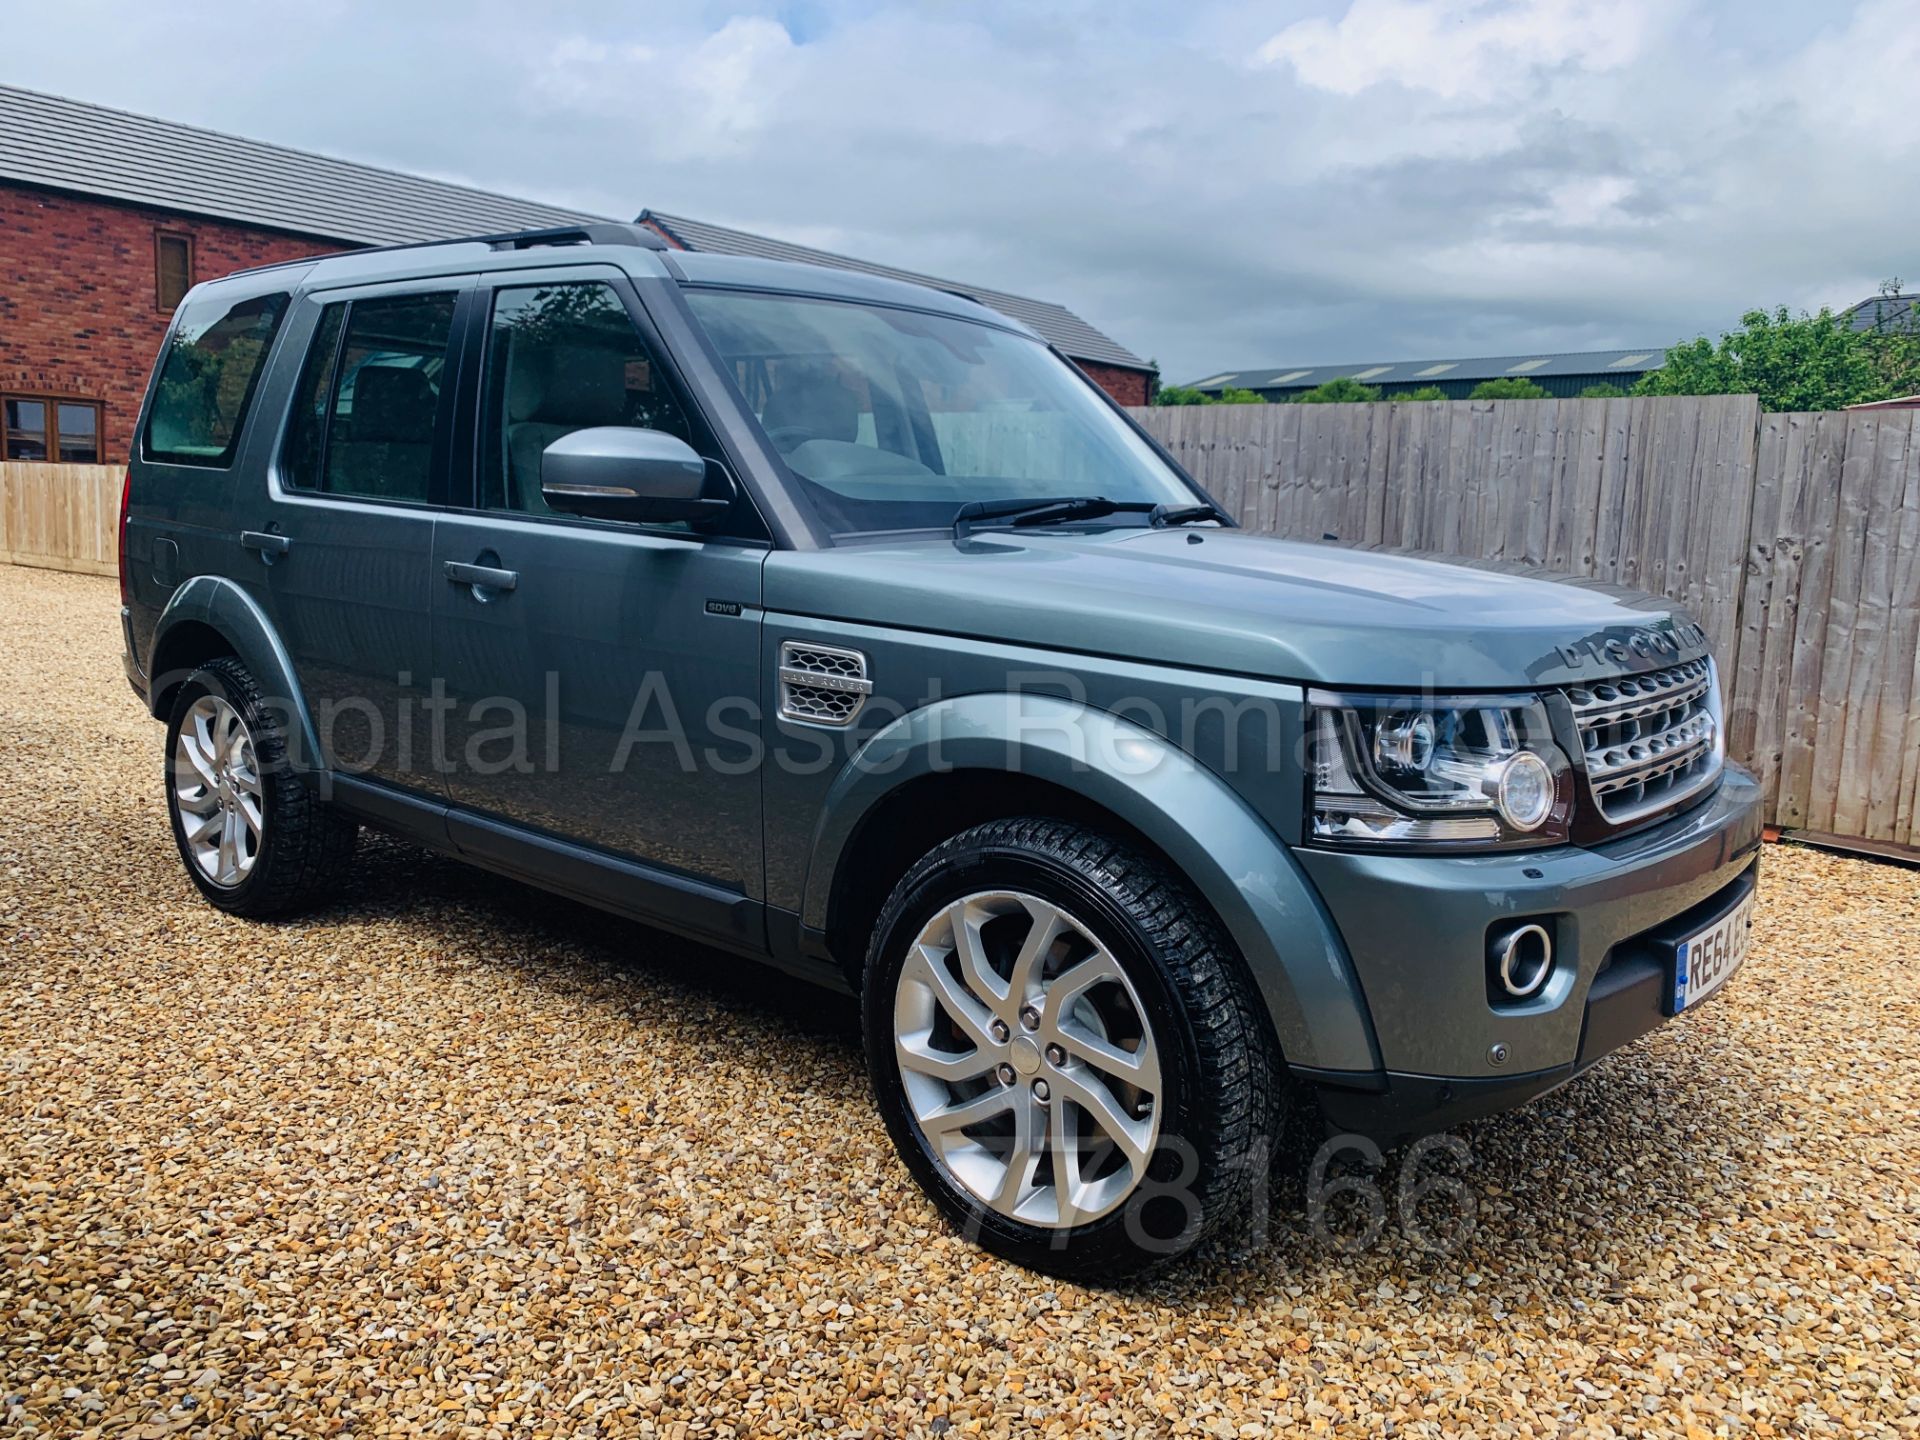 (On Sale) LAND ROVER DISCOVERY 4 *HSE* 7 SEATER SUV (64 REG) '3.0 SDV6 -8 SPEED AUTO' *MASSIVE SPEC*